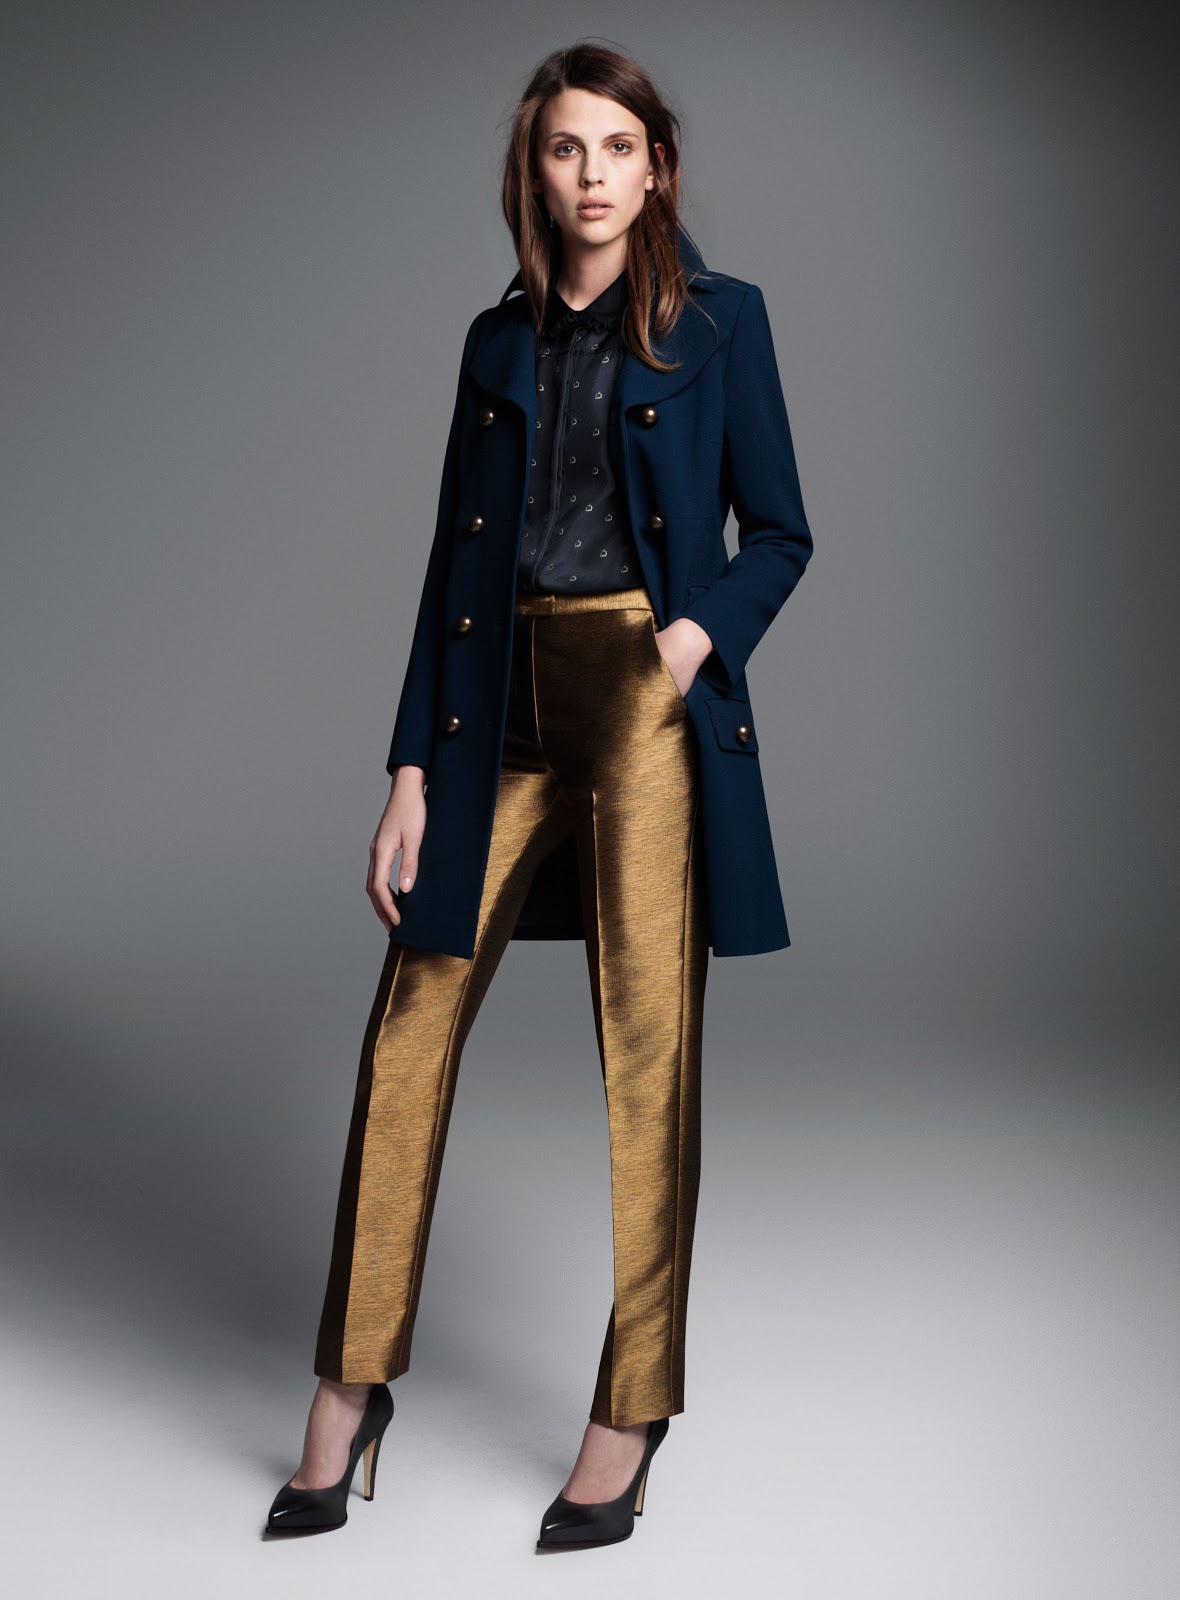 How to wear gold trousers — That's Not My Age